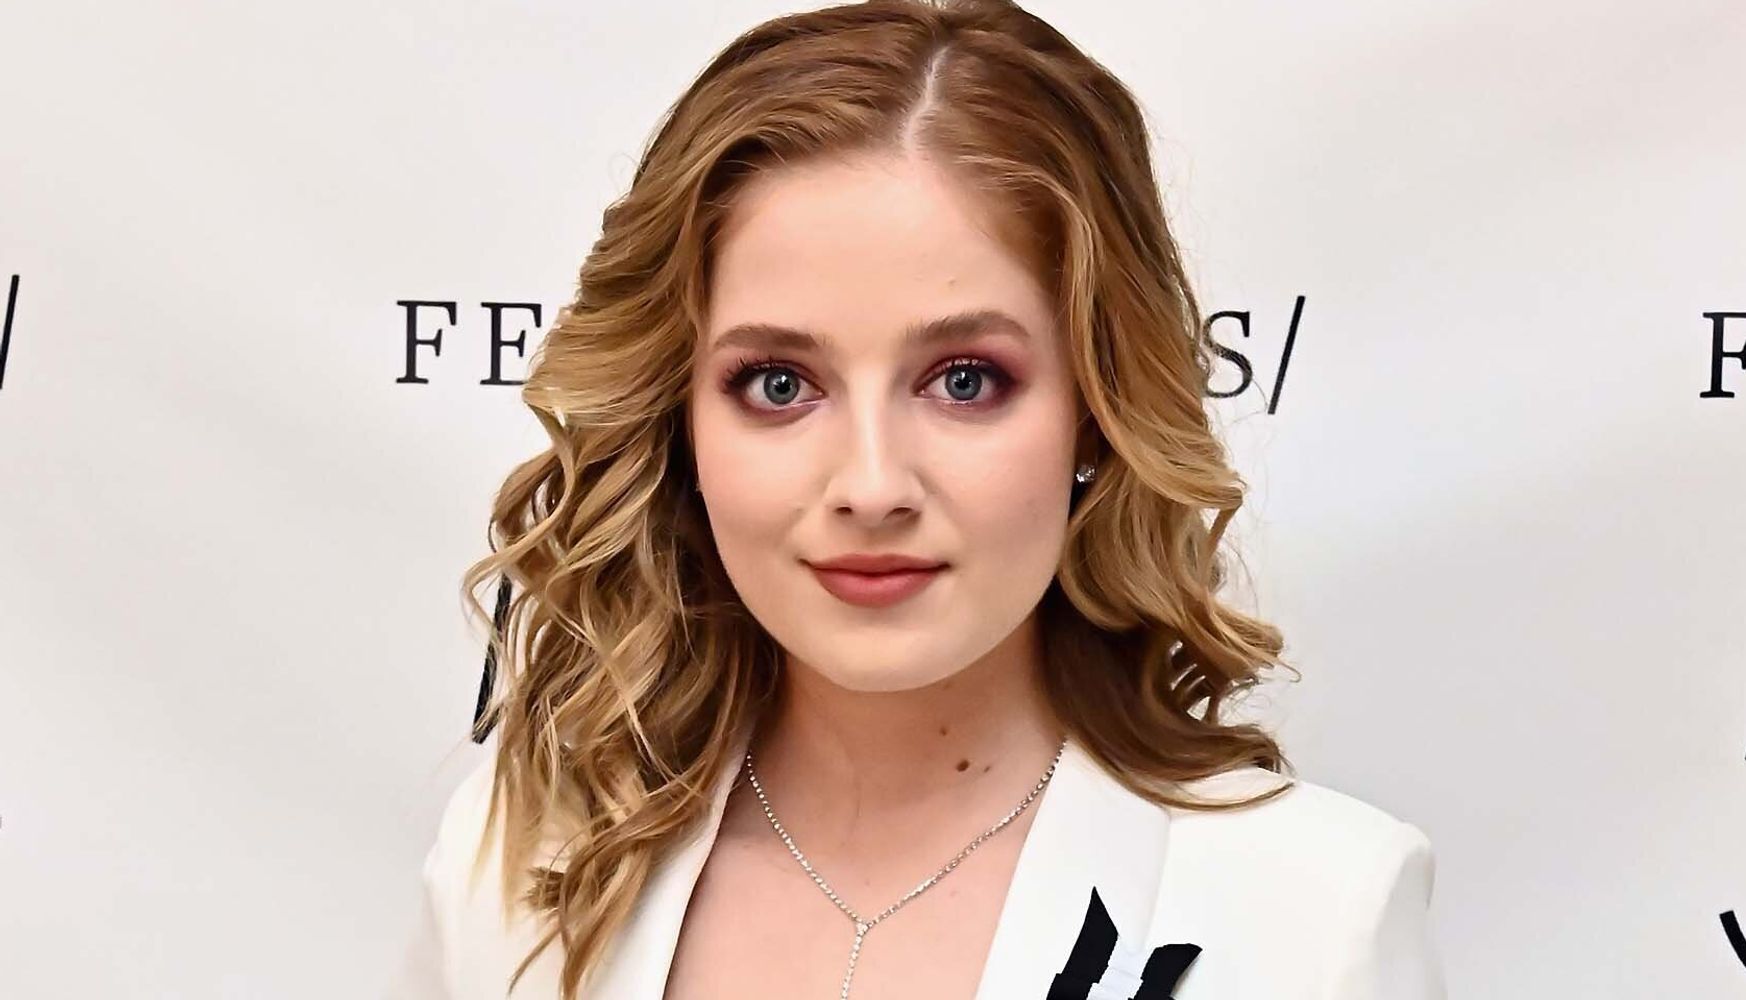 Jackie Evancho Reveals She Has Osteoporosis Triggered By Anorexia: ‘I’m However Struggling’